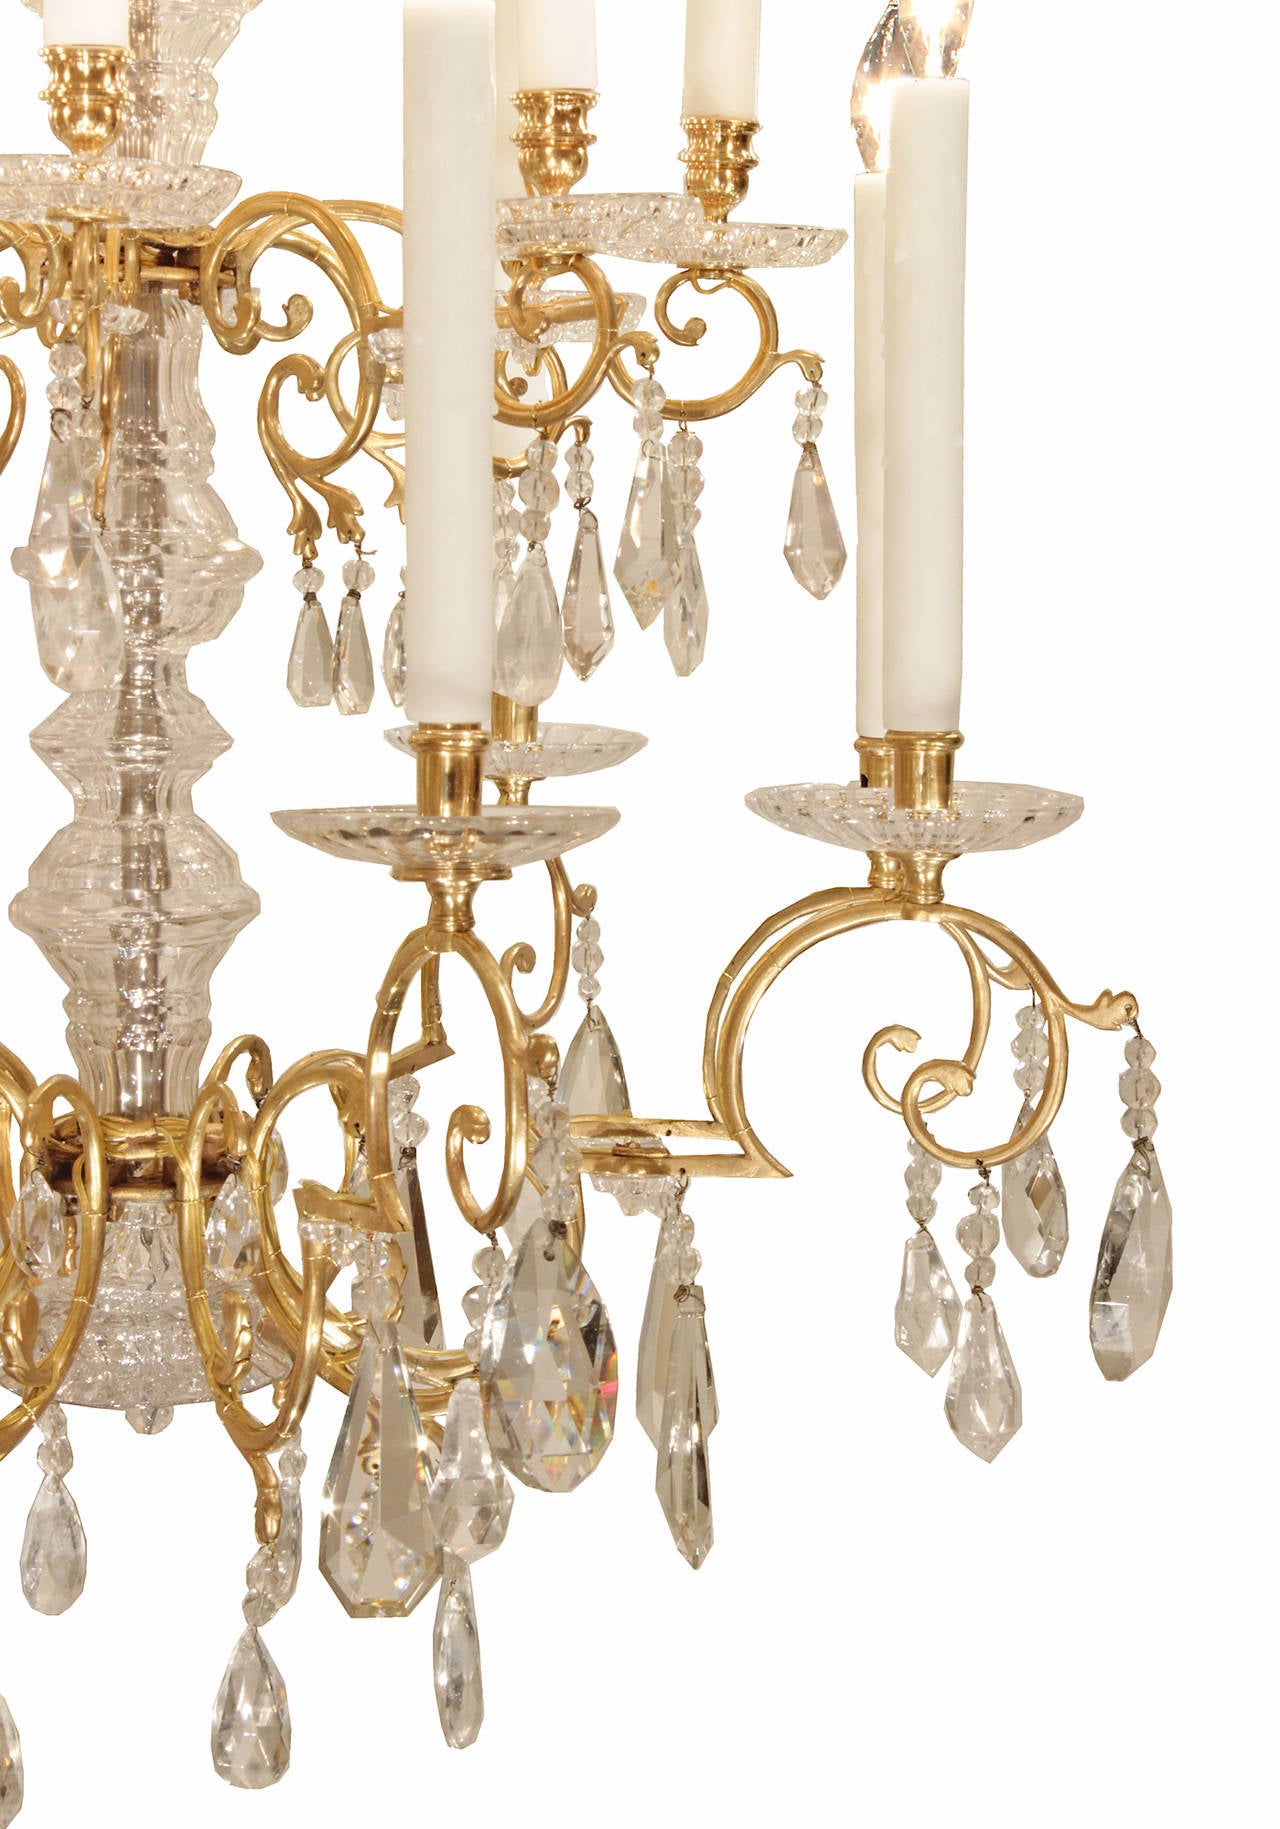 An elegant French 19th century Louis XVI st. sixteen light ormolu and all original Baccarat and rock crystal chandelier. The chandelier is centered by a bottom solid Baccarat crystal base surrounded by elegant cut crystal pendants. The arms, on two